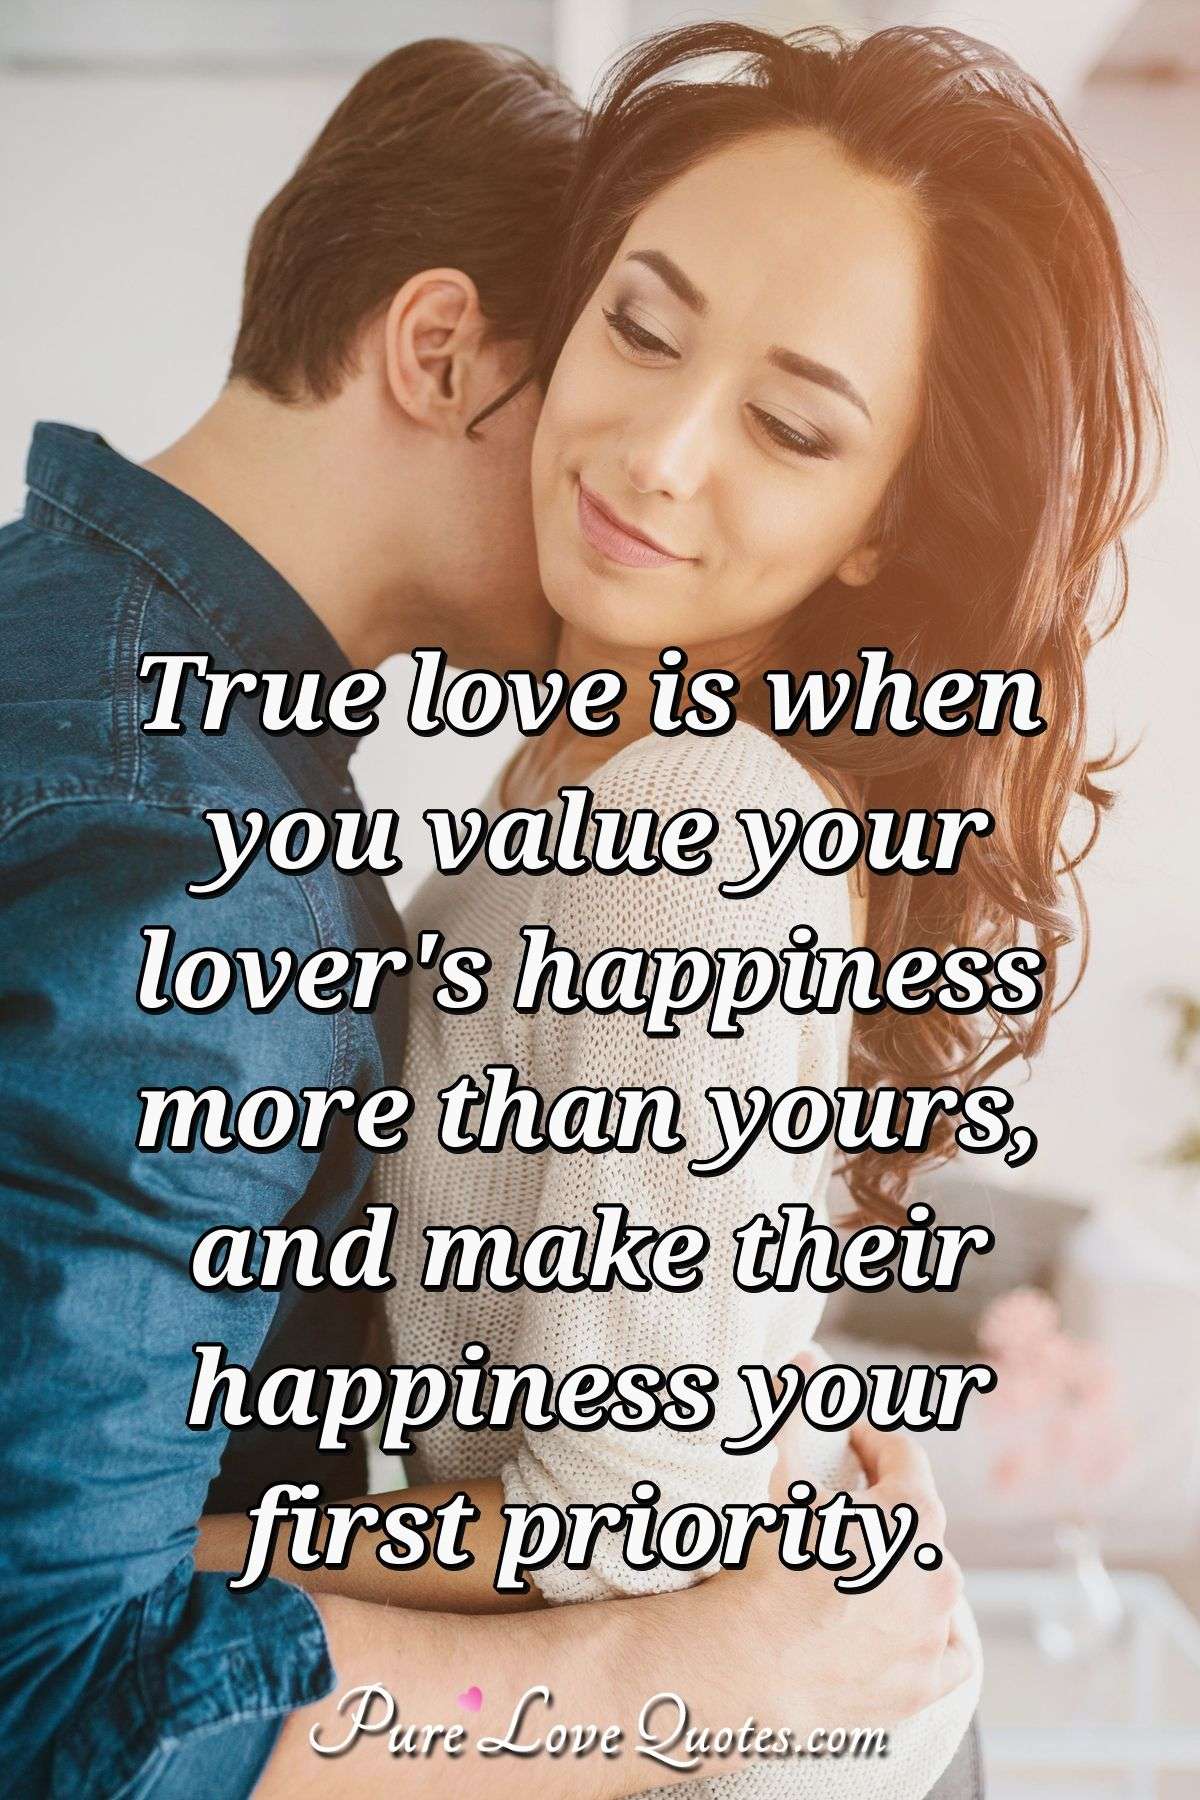 Love Relationship Quote Images